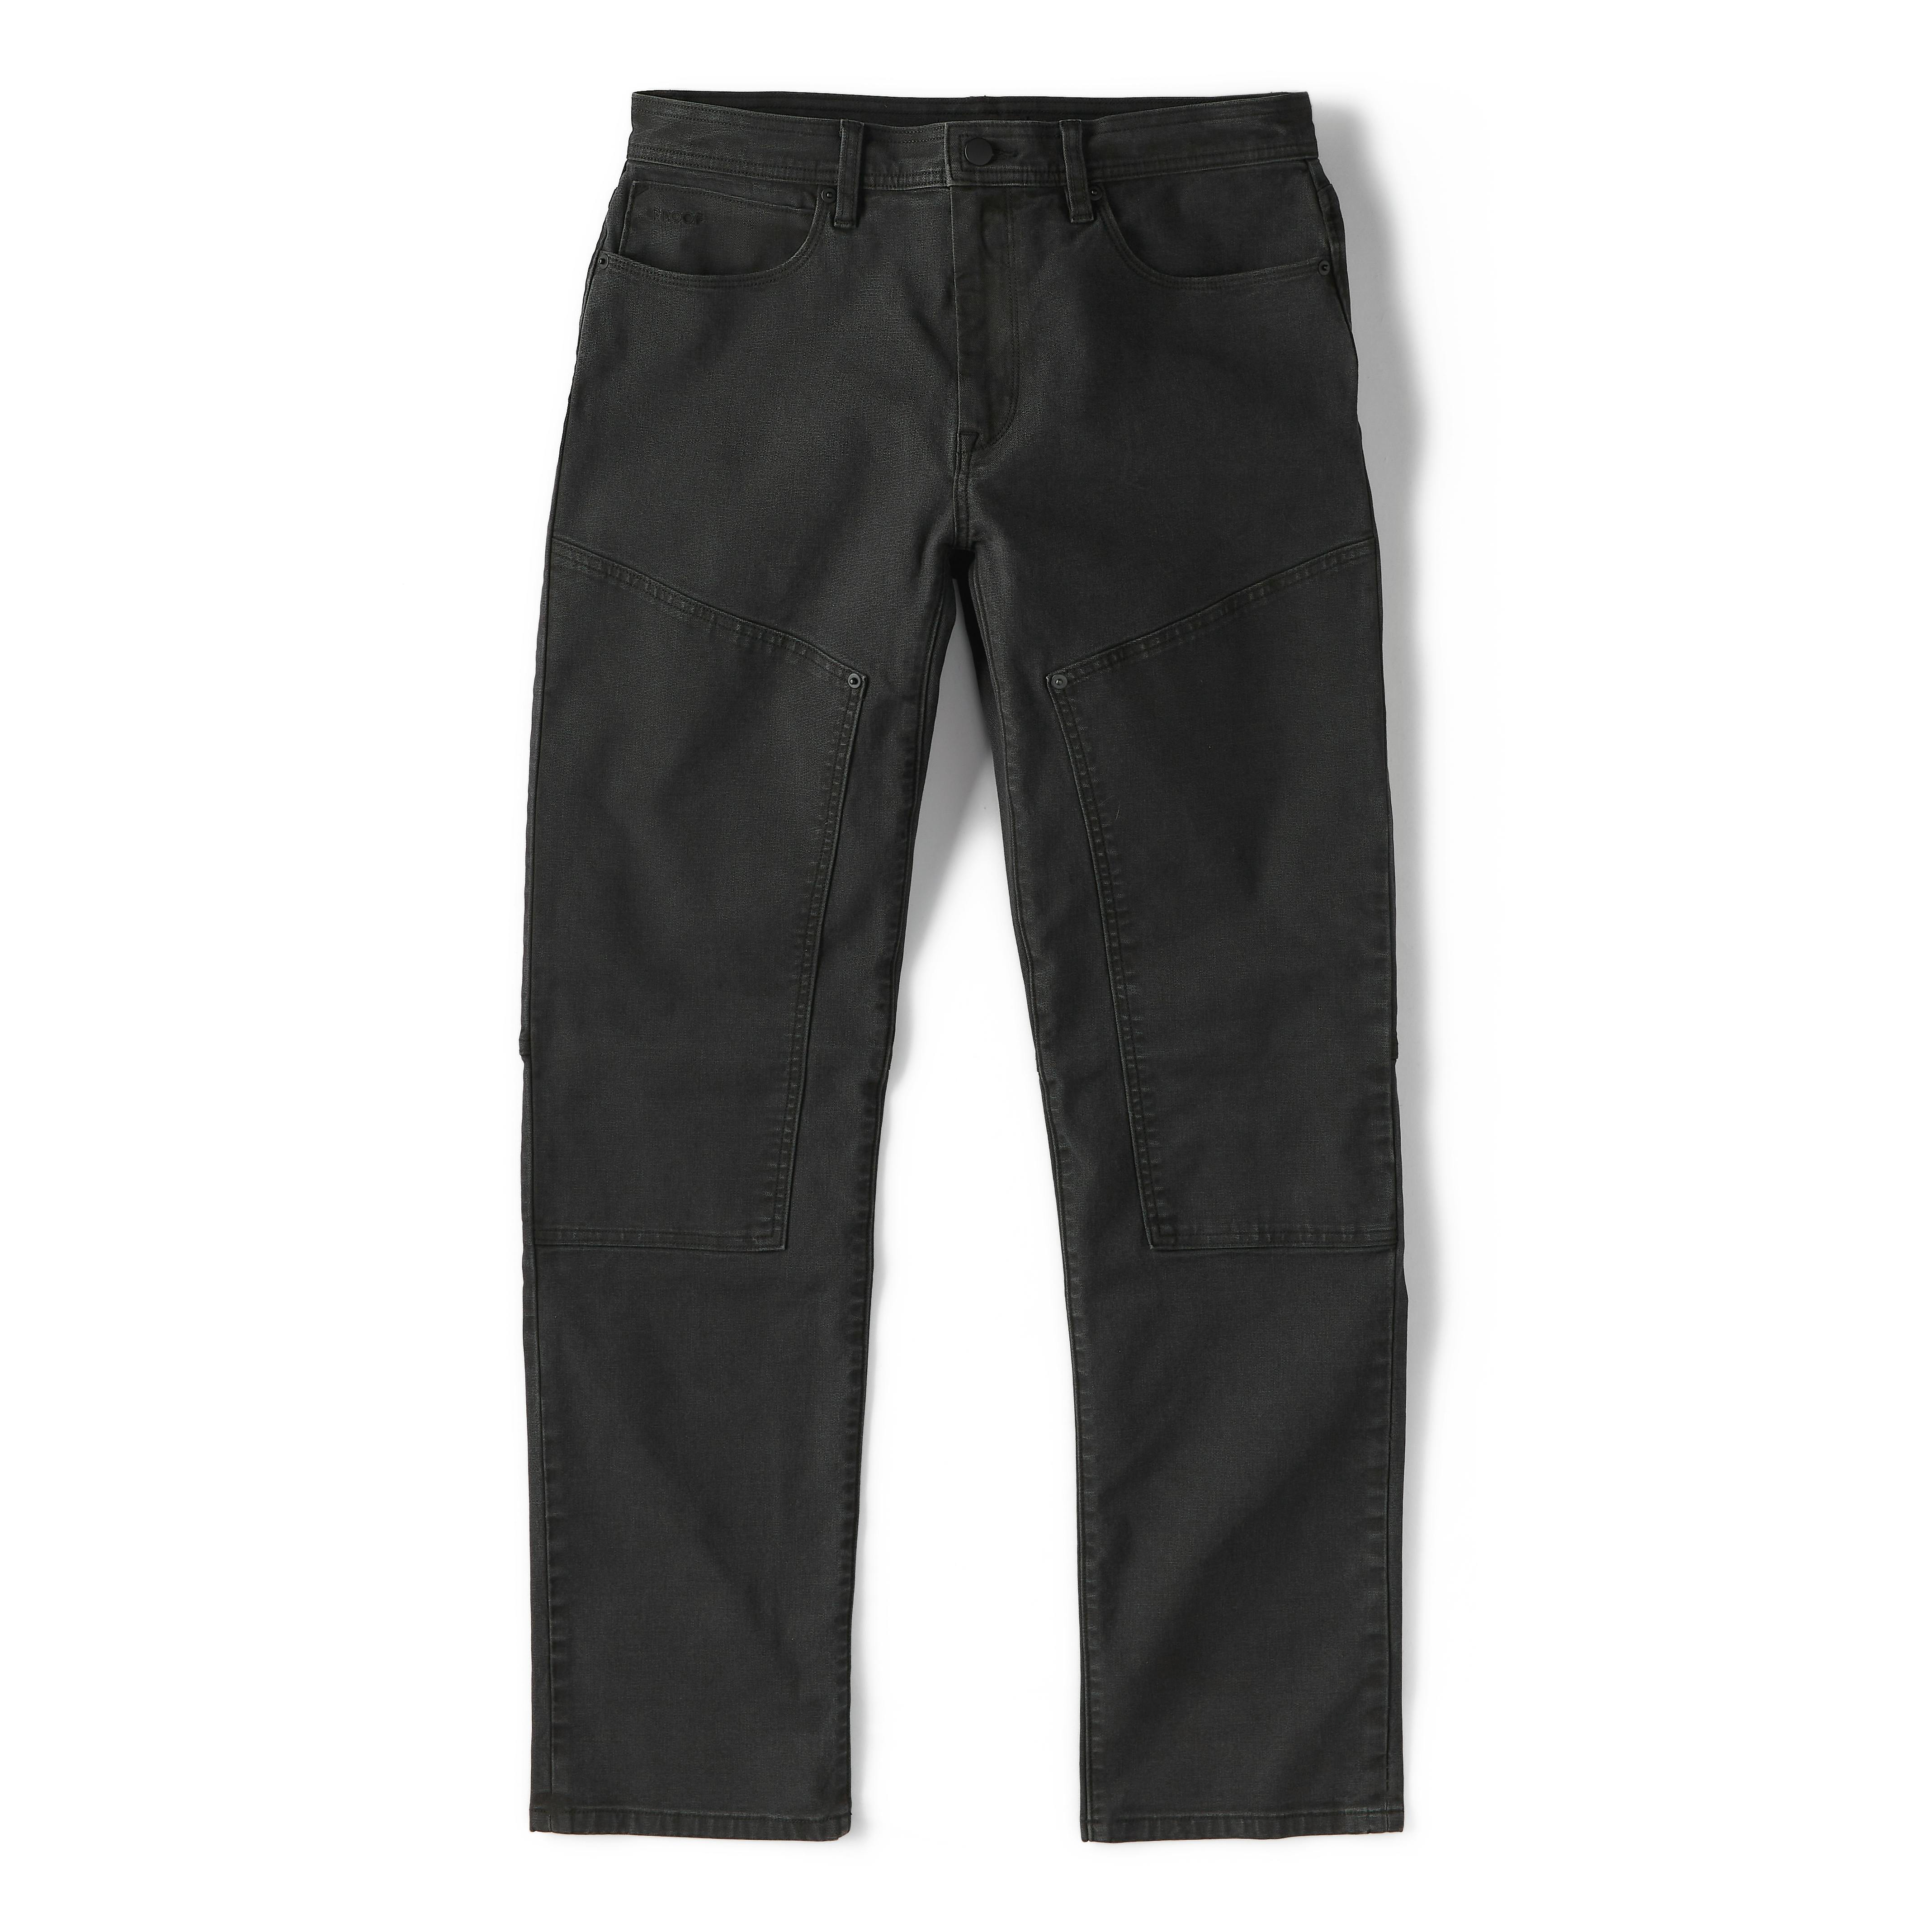 Proof Rover Double-Knee Work Pant - Straight - Canyon